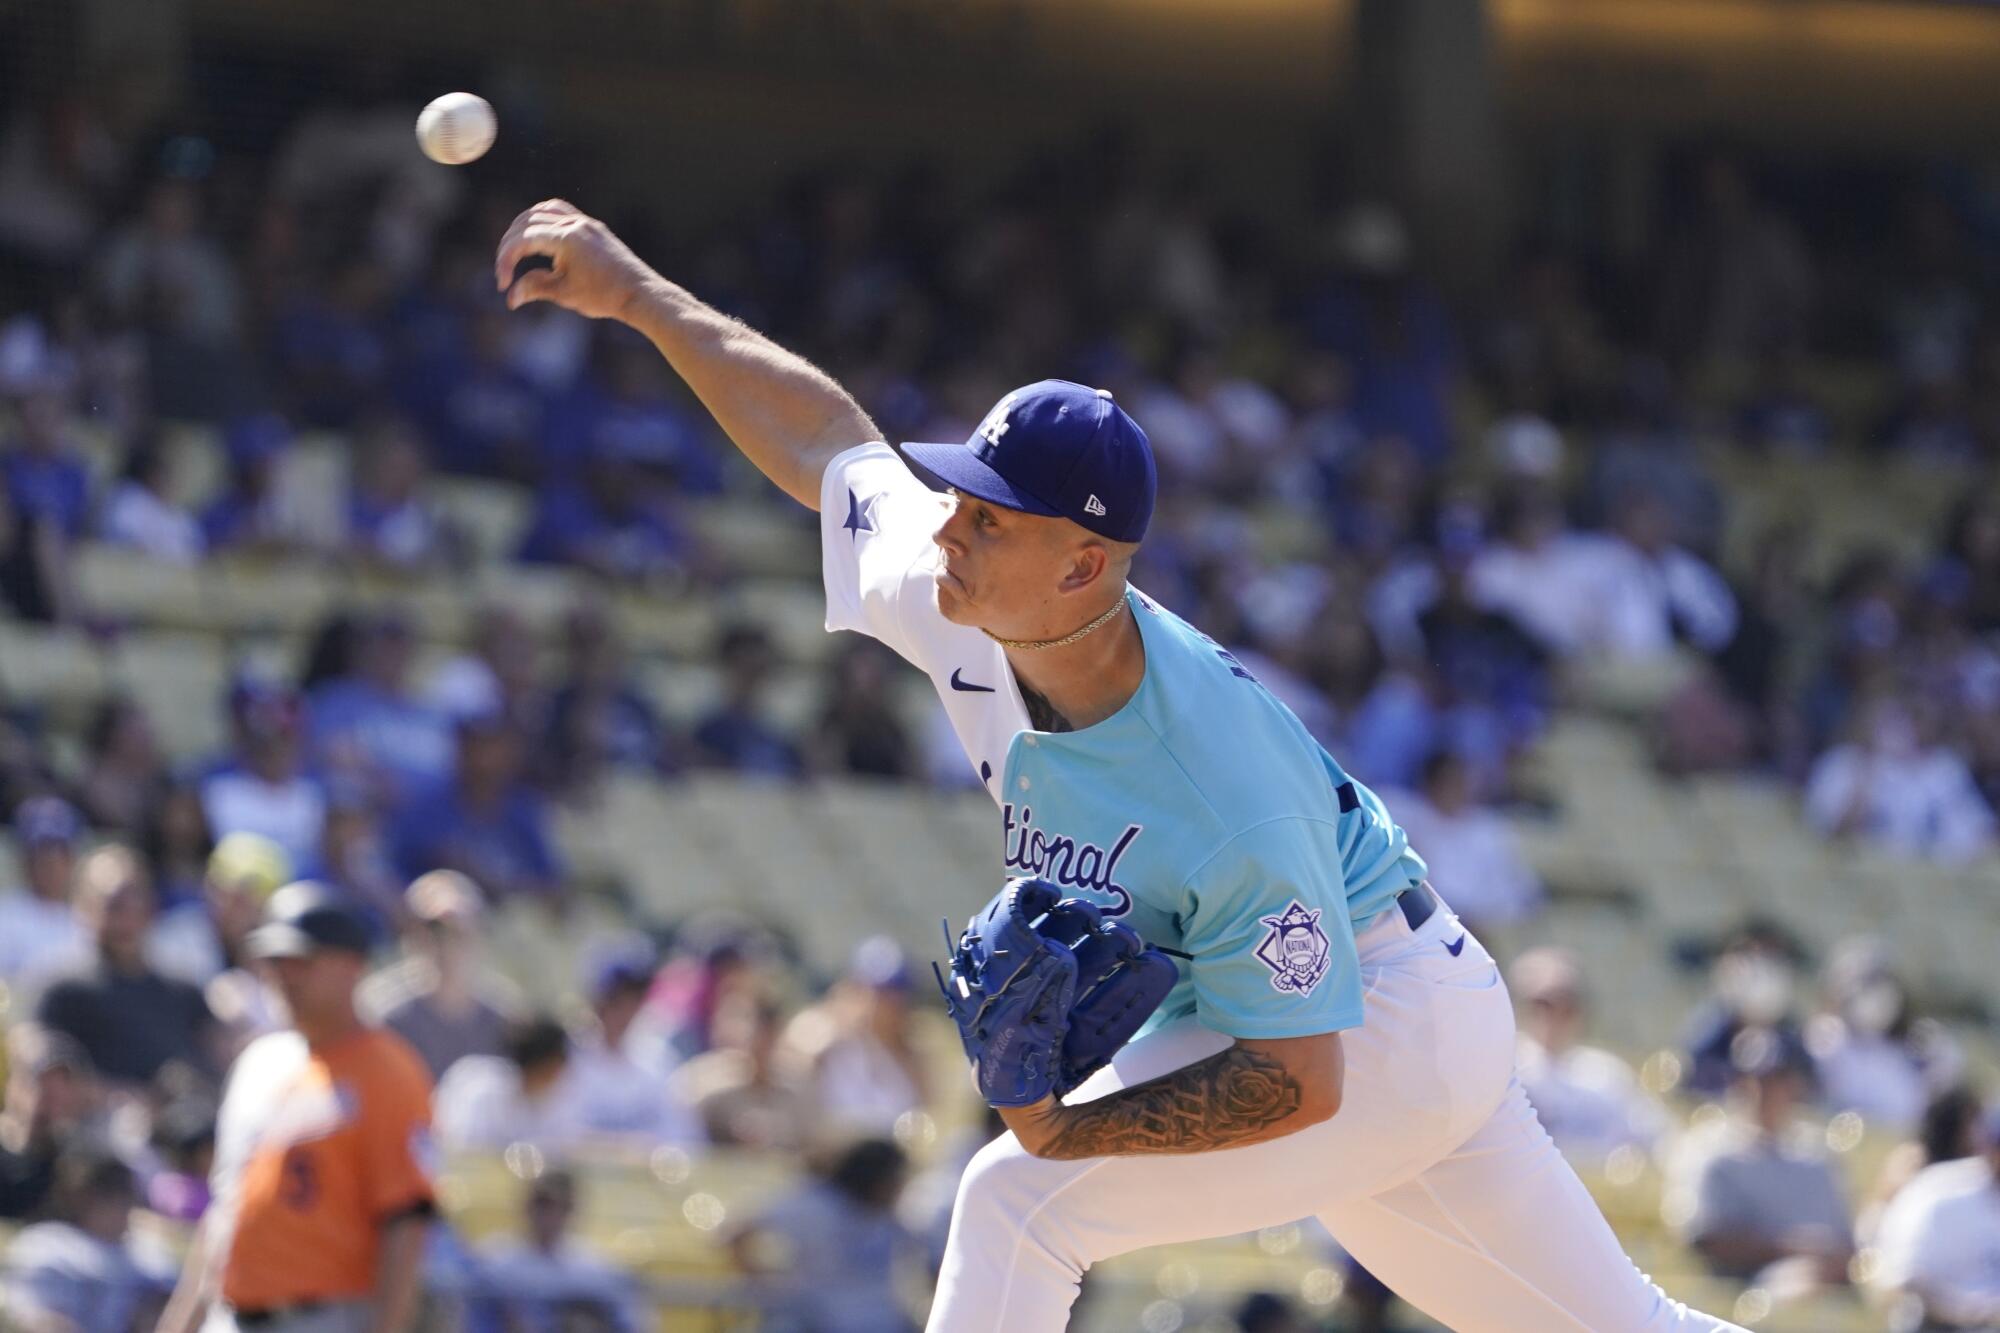 Dodgers starting pitcher Bobby Miller throws in the MLB All-Star Futures game in July 2022.